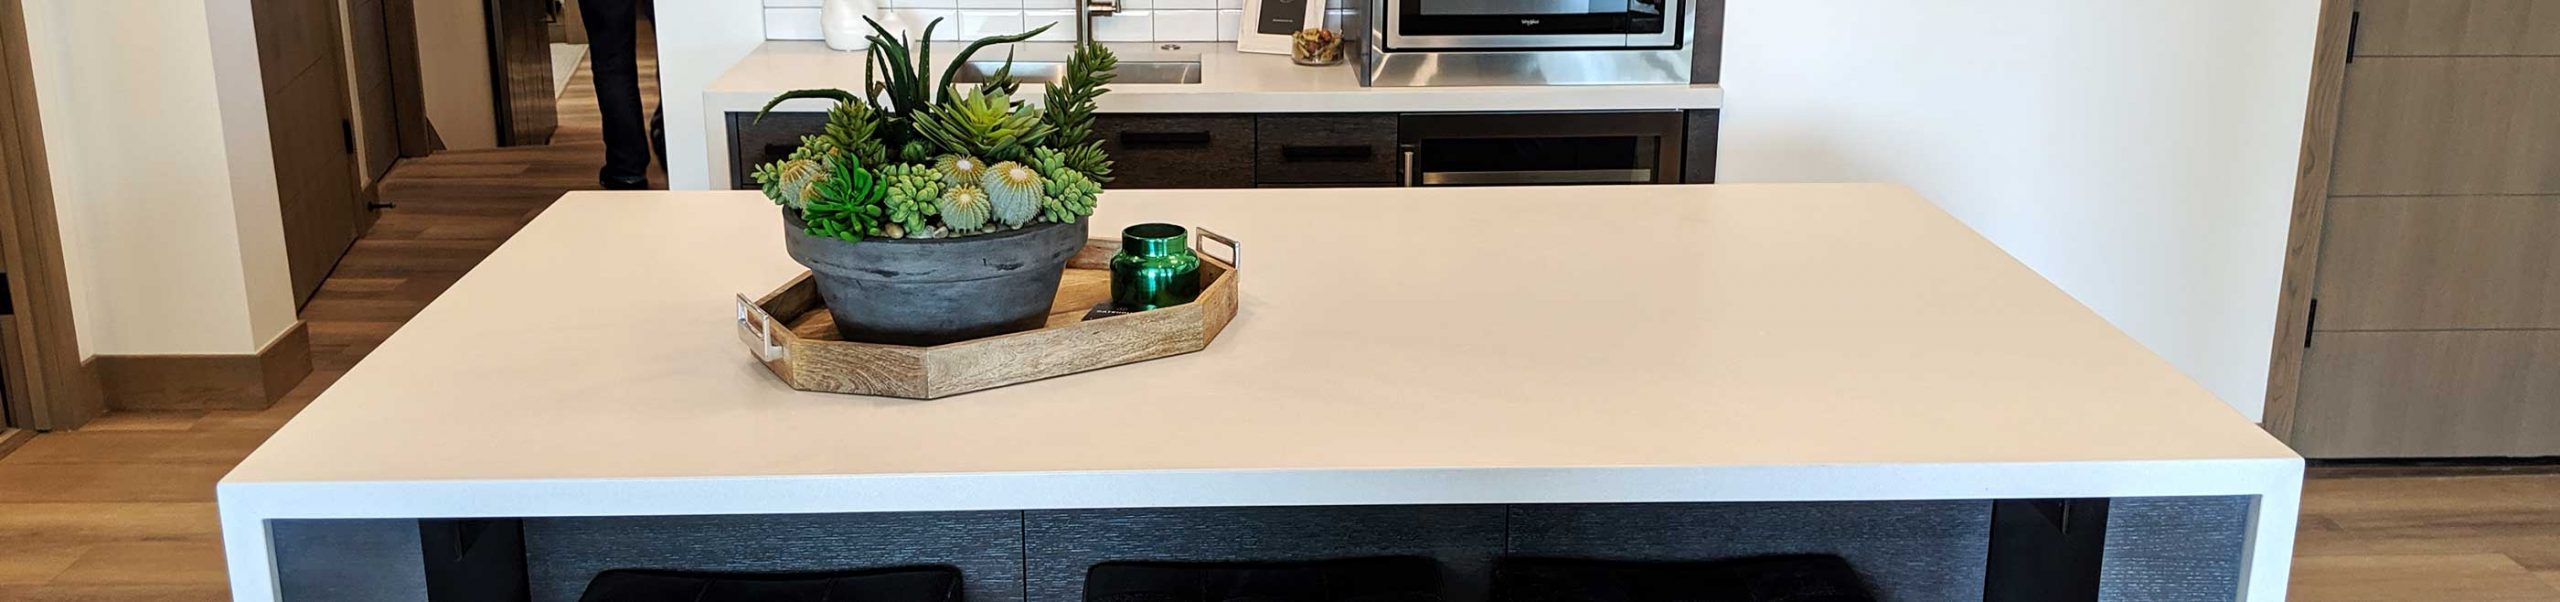 Renovated countertop for Red Ledges